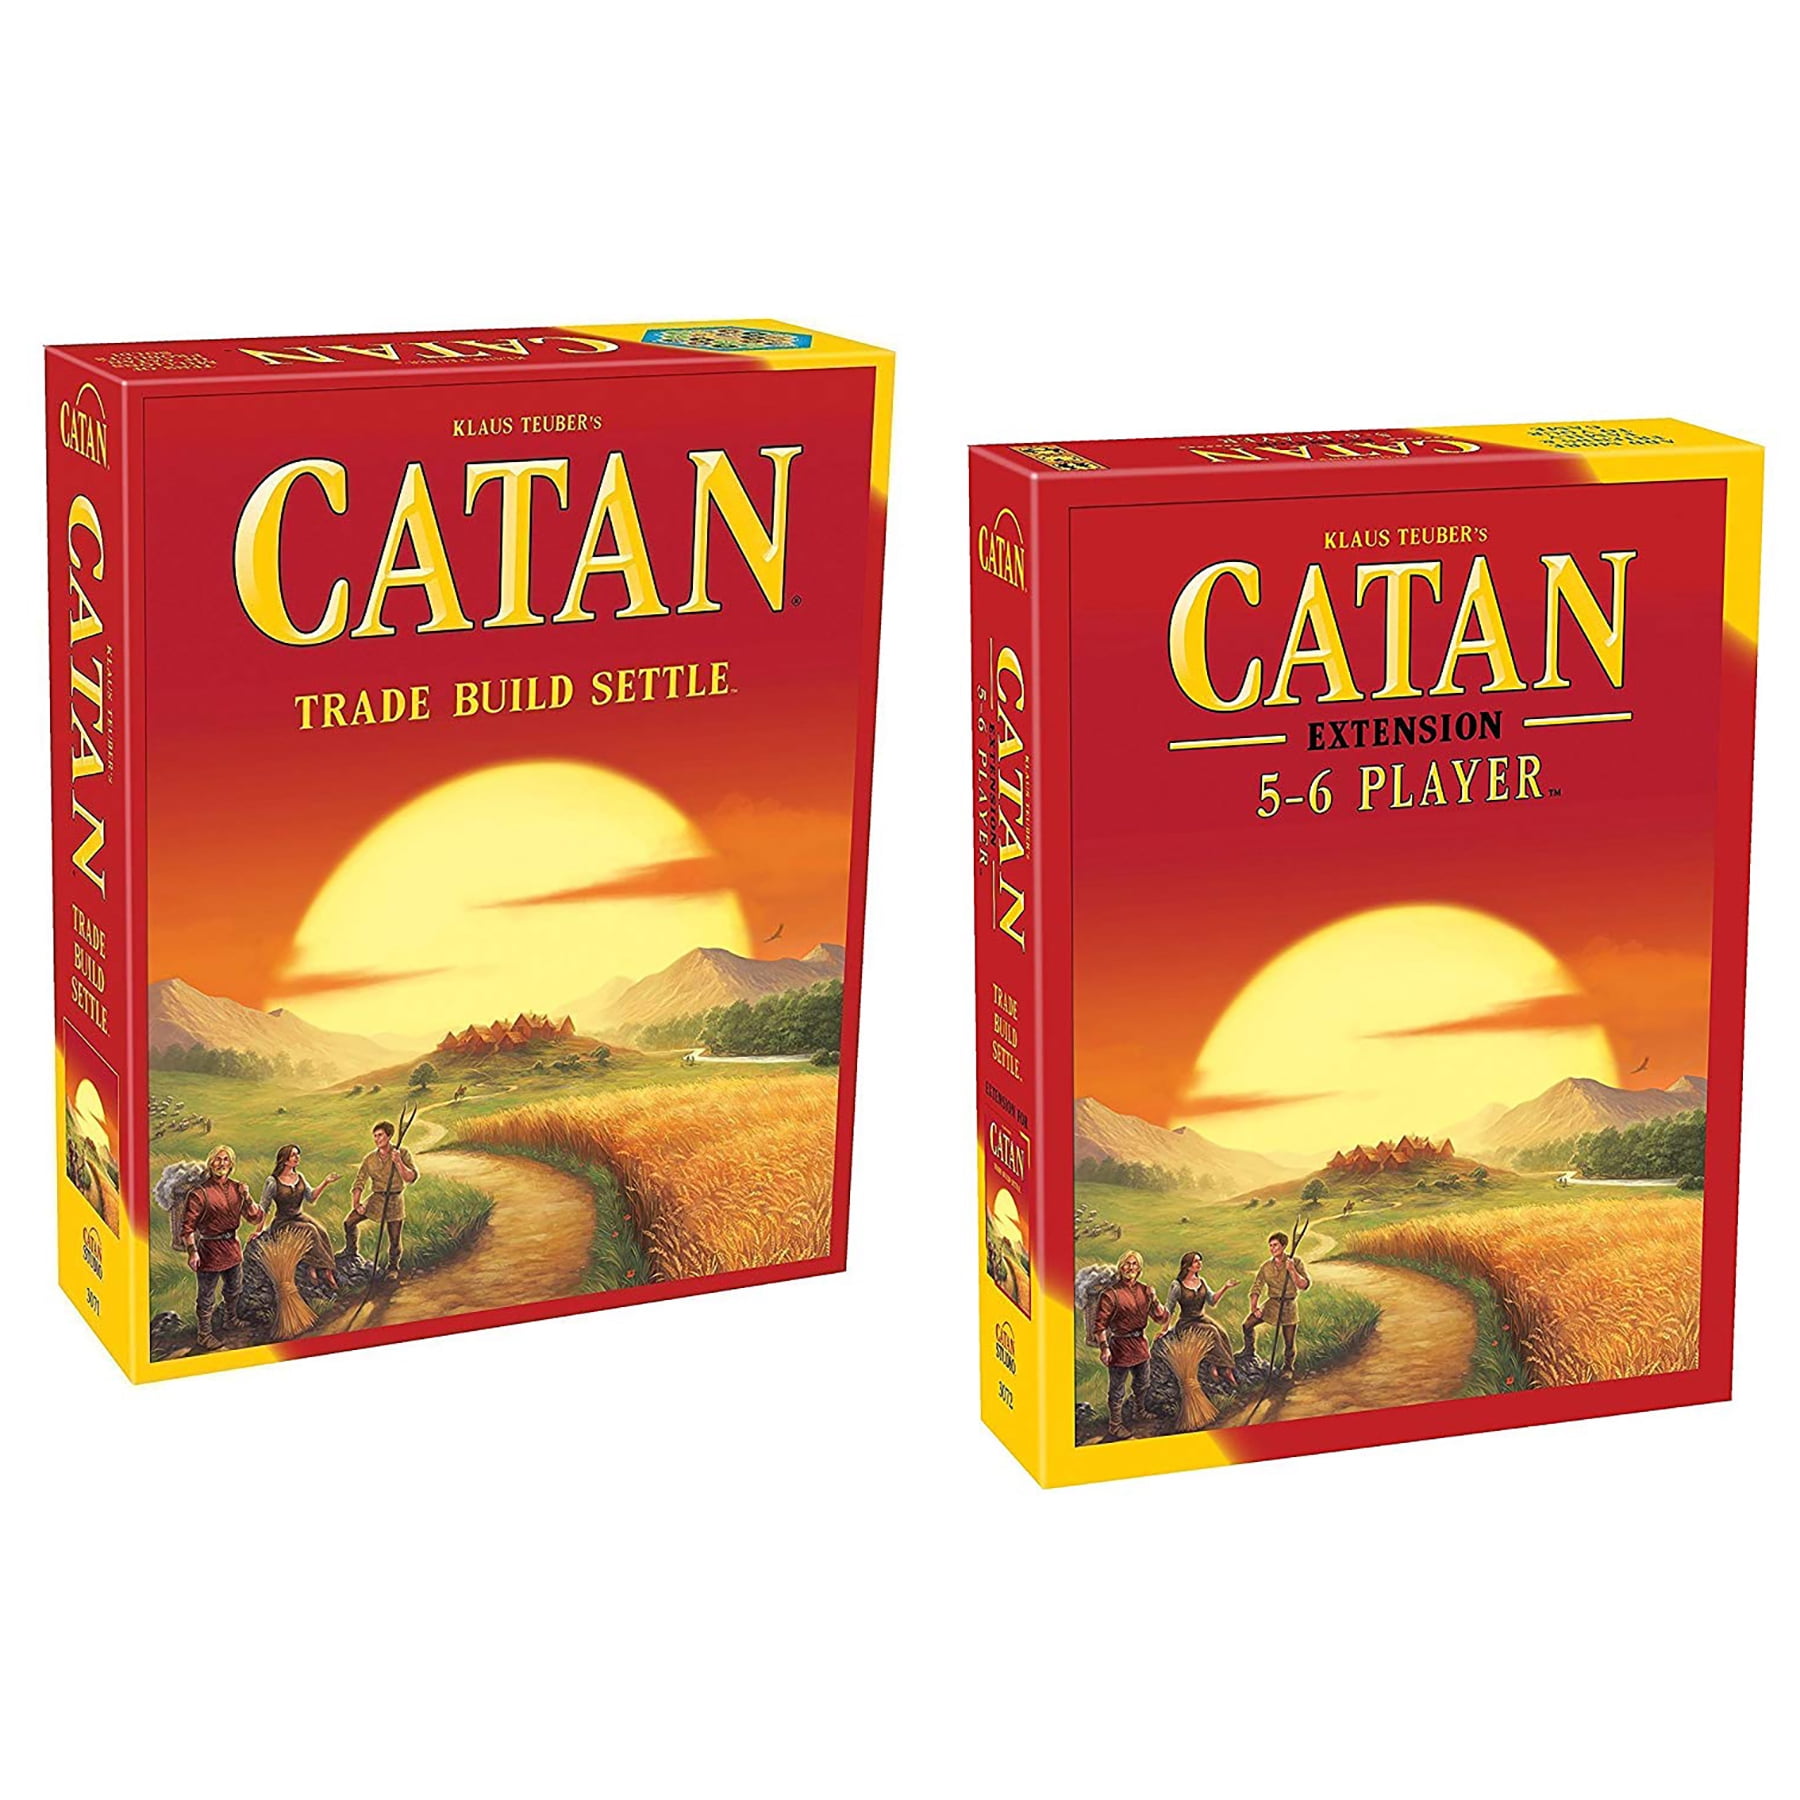 Catan 5-6 Player ExtensionHarbor 5 Sided Cover 3:1 PieceExtra Game Pieces 